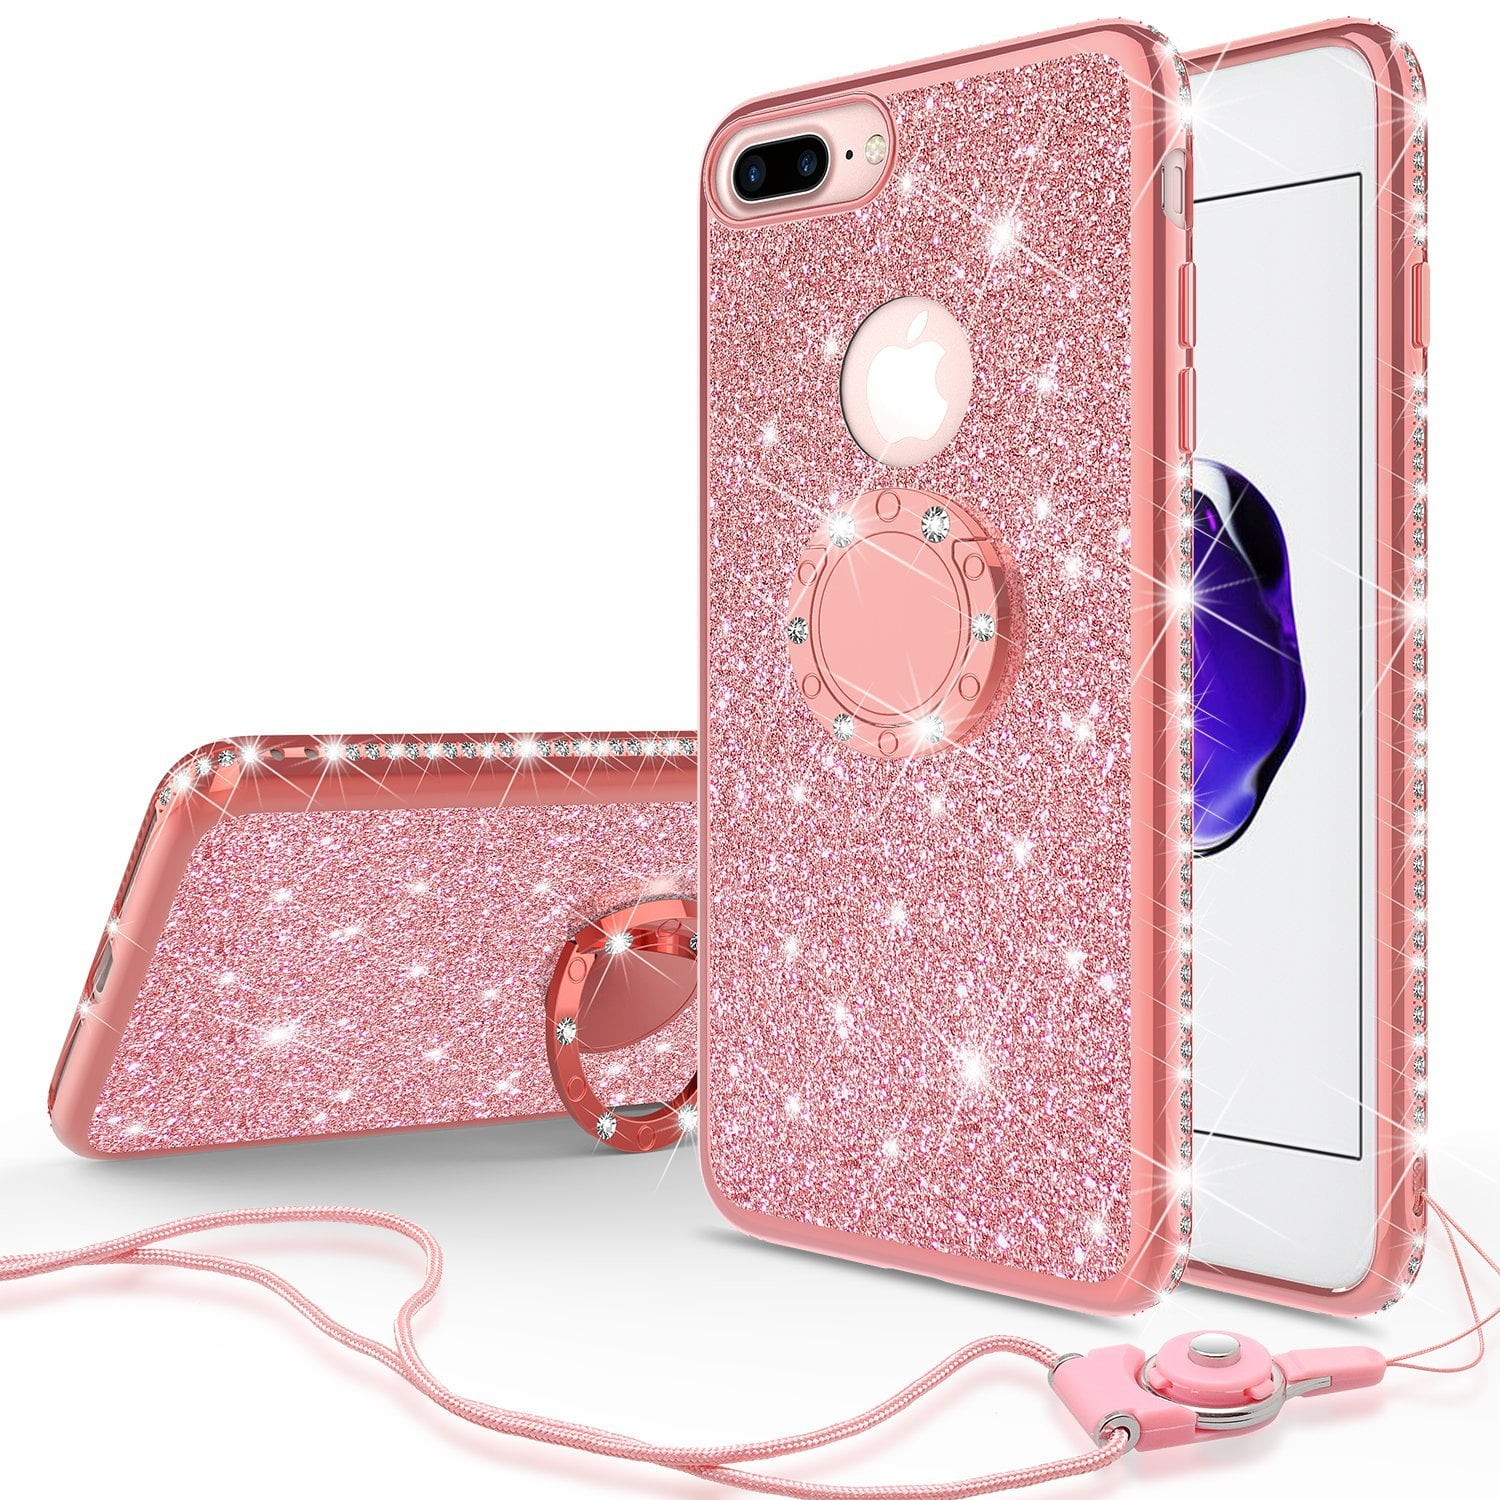 Absoluut Avonturier Post impressionisme Apple Iphone 8 Plus Case,Iphone 7 Plus Case Glitter Cute Phone Case for  Girls with Kickstand,Bling Diamond Rhinestone Bumper with Ring Stand Thin  Soft Sparkly iPhone 7/8 Plus Case (Rose Gold) -